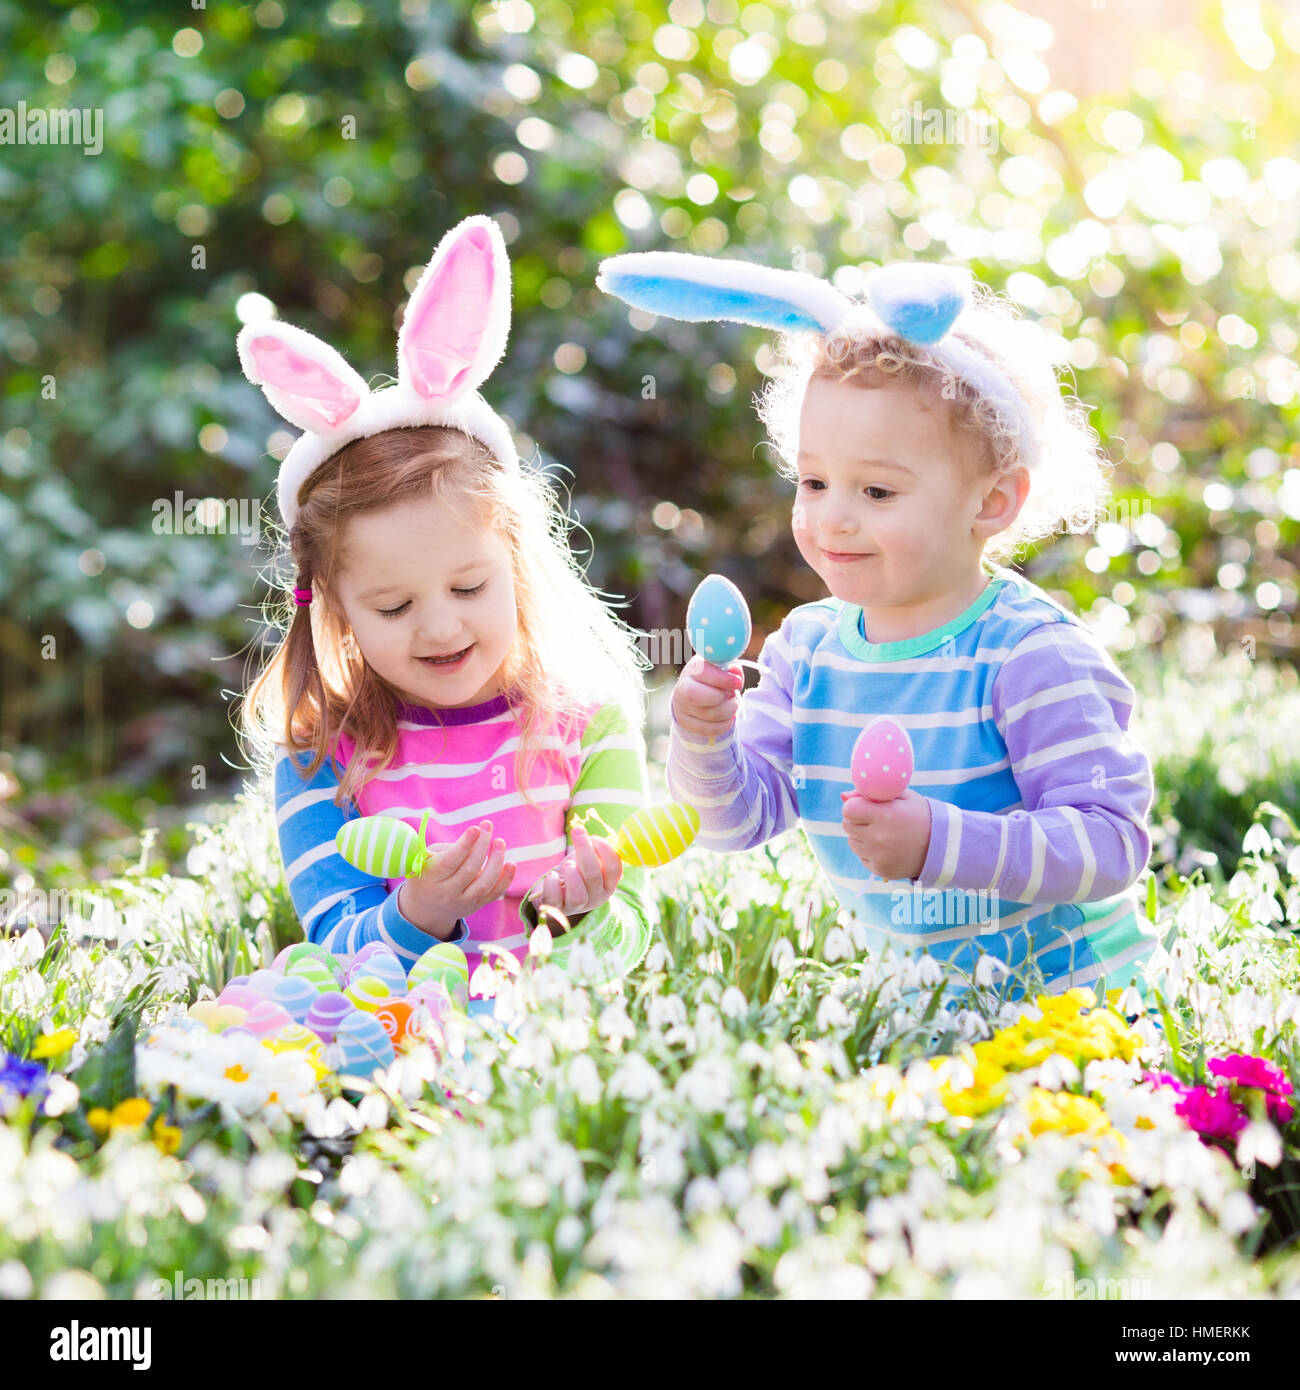 Kids on Easter egg hunt in blooming spring garden. Children with bunny ears searching for colorful eggs in snow drop flowers Stock Photo